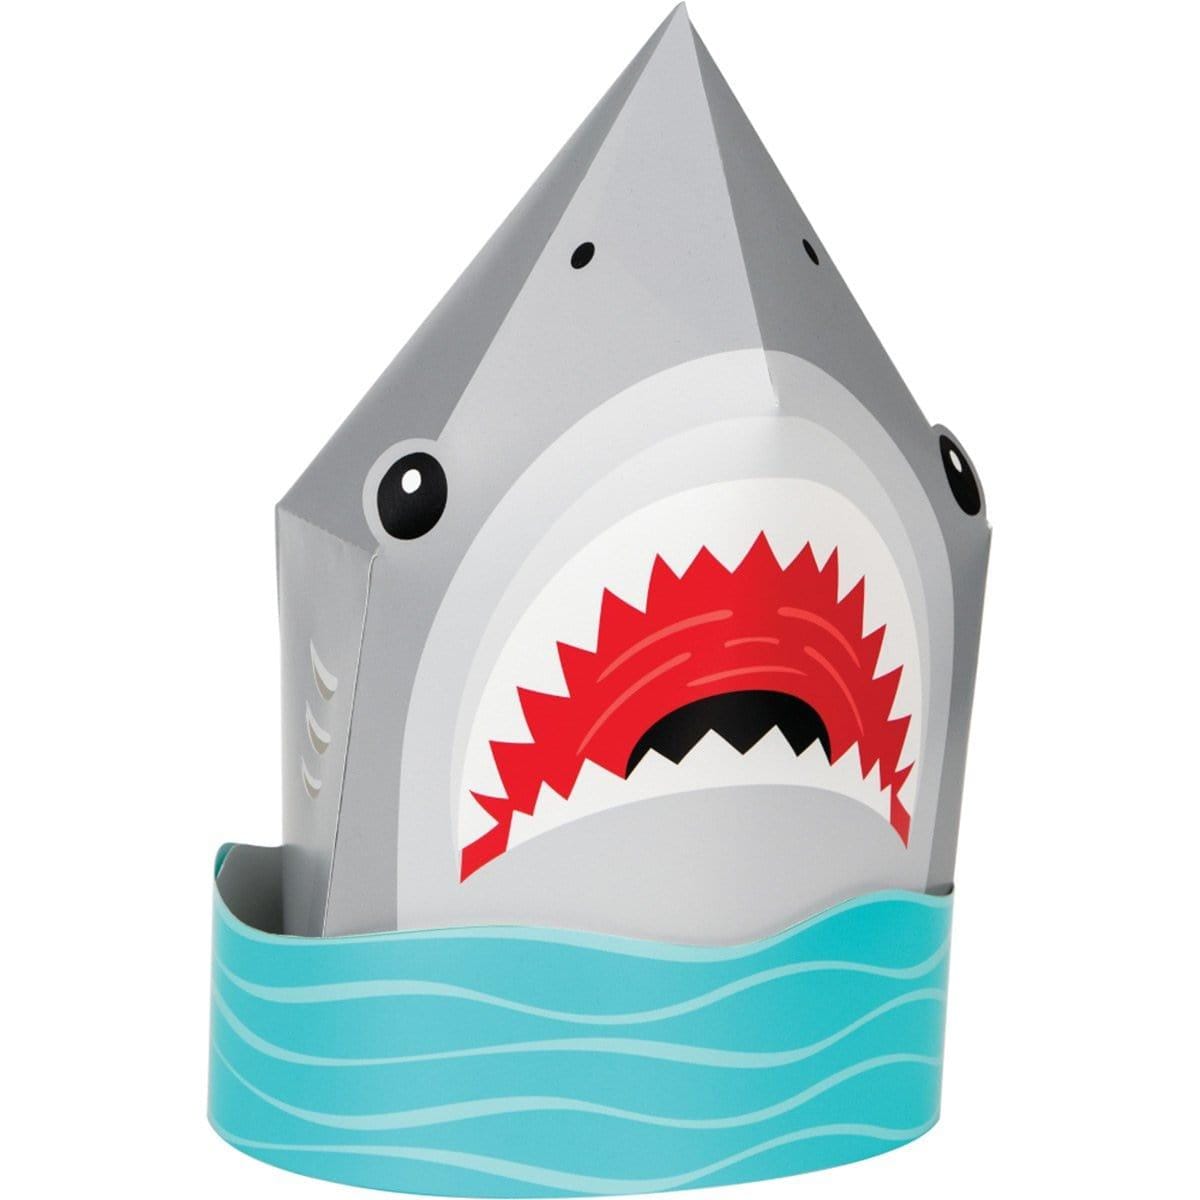 Buy Kids Birthday Shark Party Centerpiece sold at Party Expert